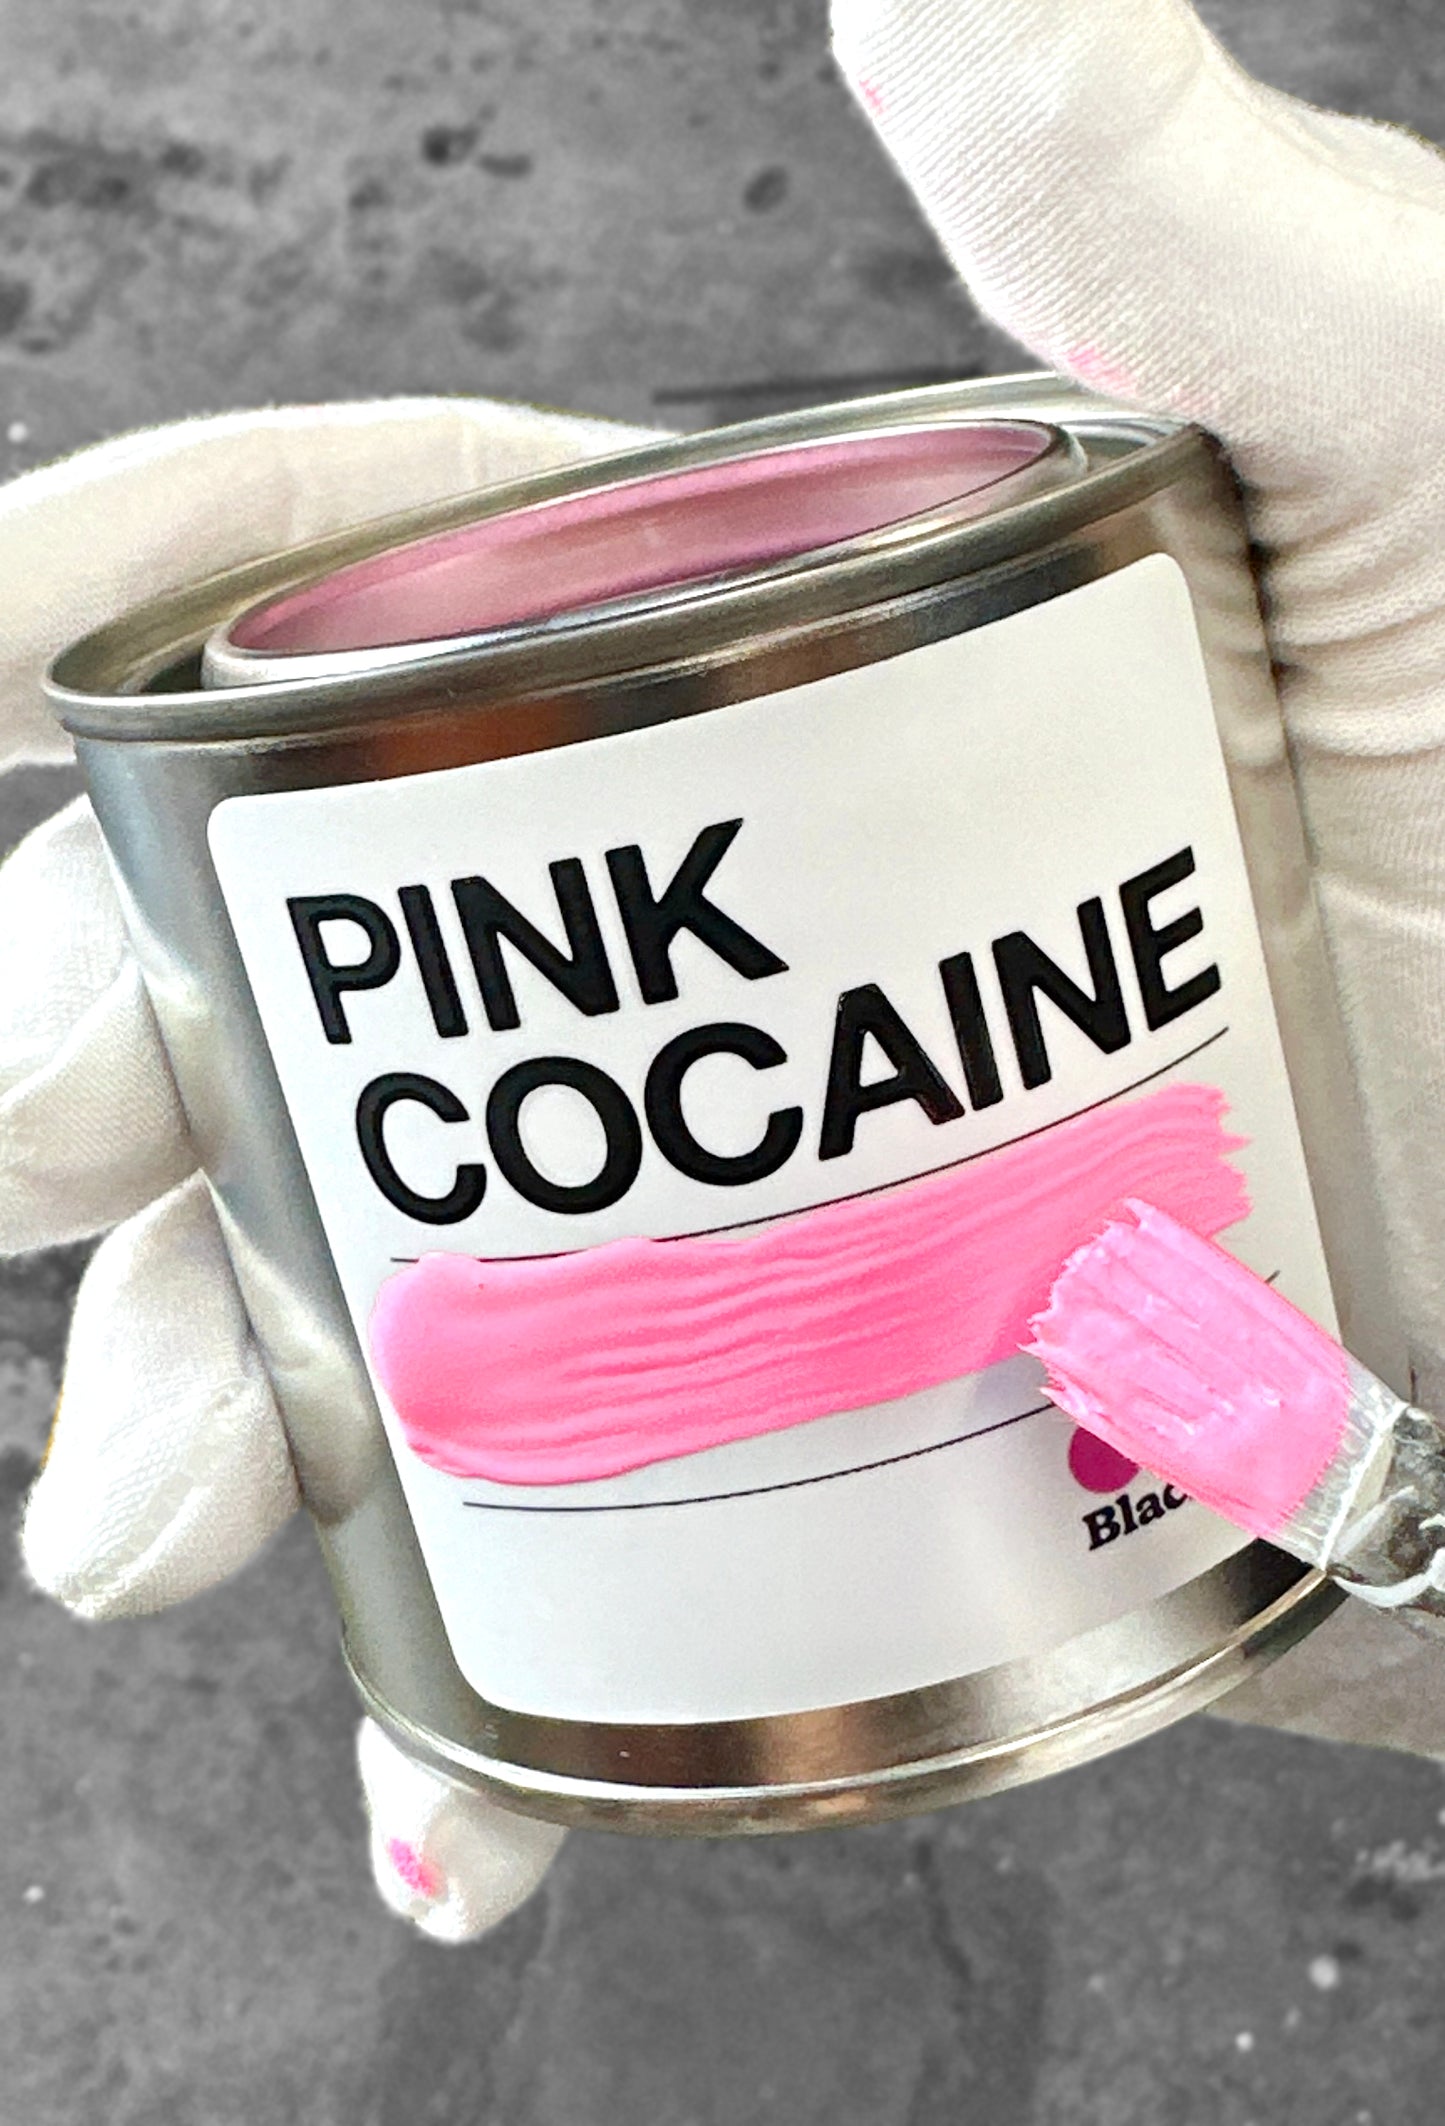 Pink Cocaine Candle